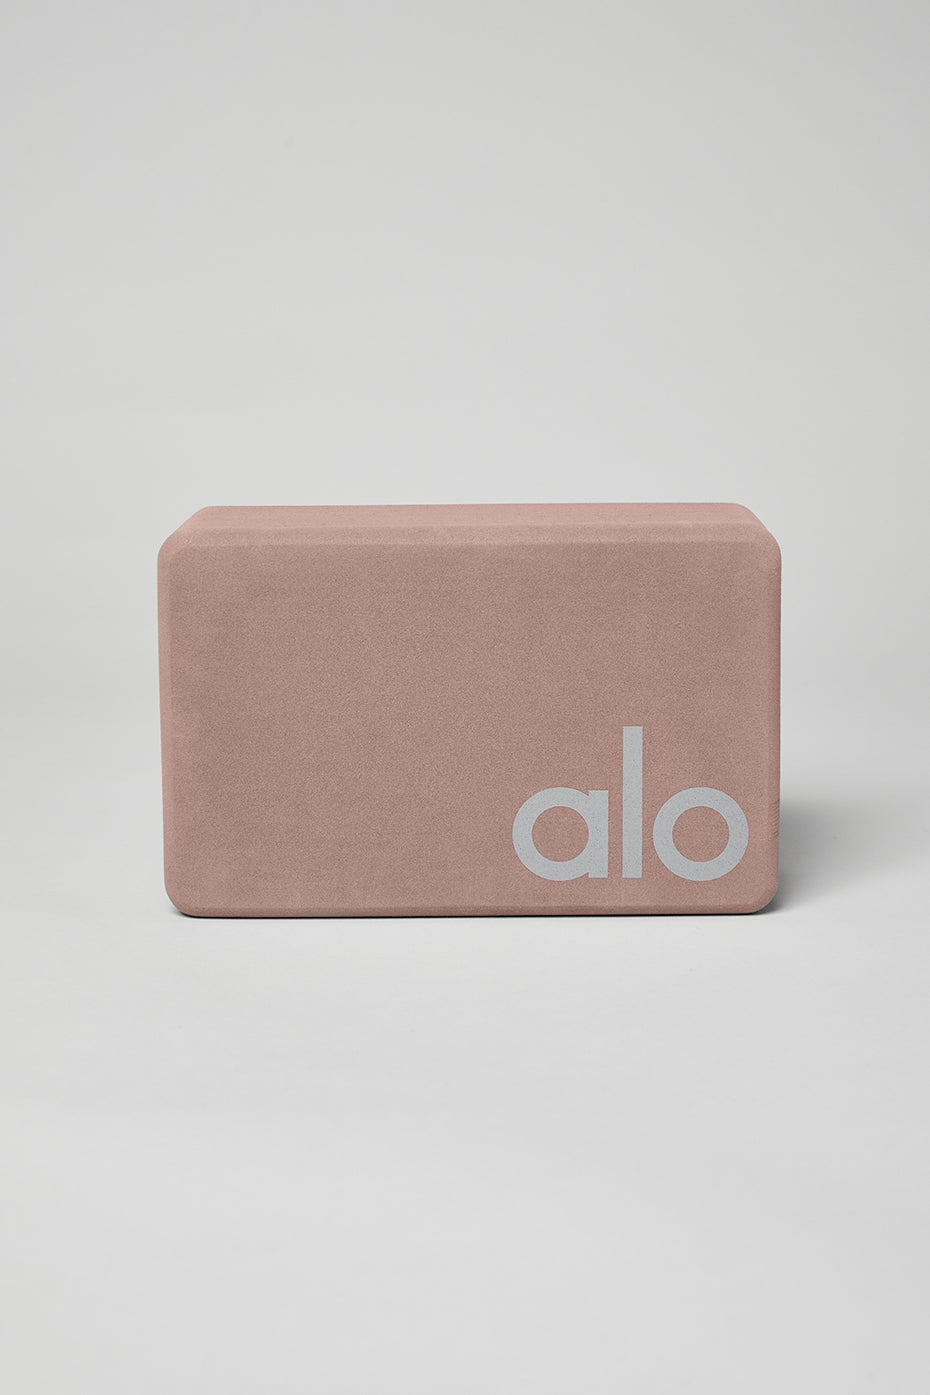 Alo Yoga No Sweat Hand Towel - Black, Furniture & Home Living, Bedding &  Towels on Carousell